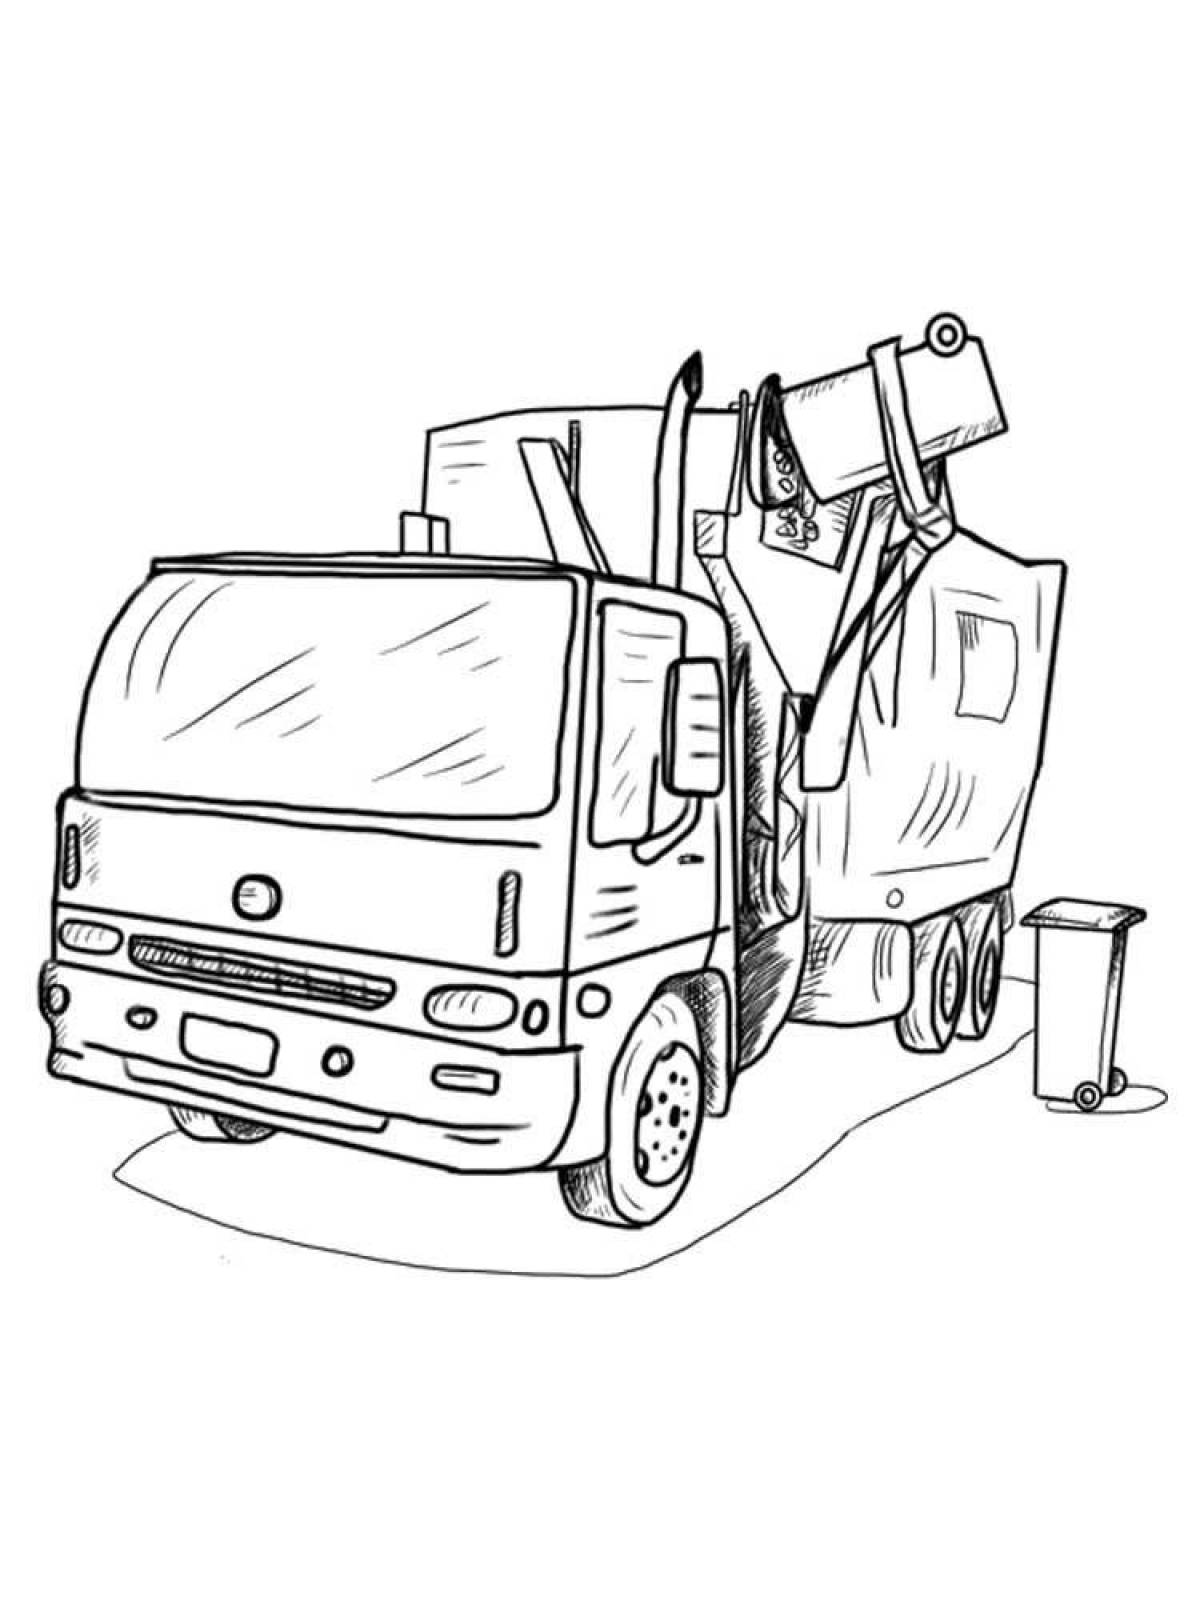 Incredible garbage truck coloring book for kids